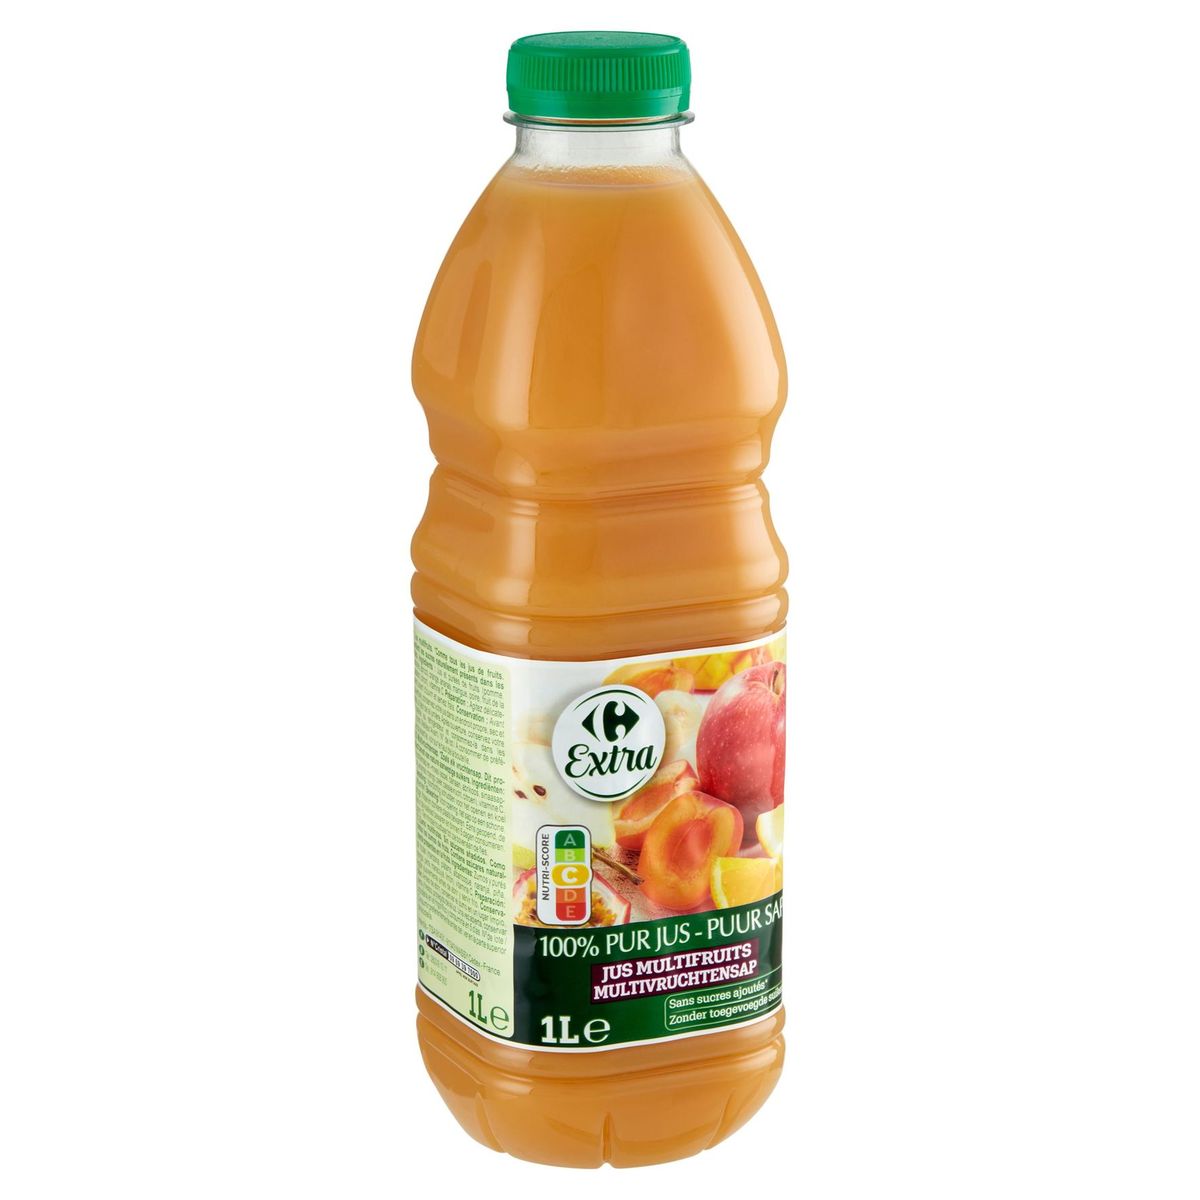 Carrefour Extra Jus Multifruits 1 L